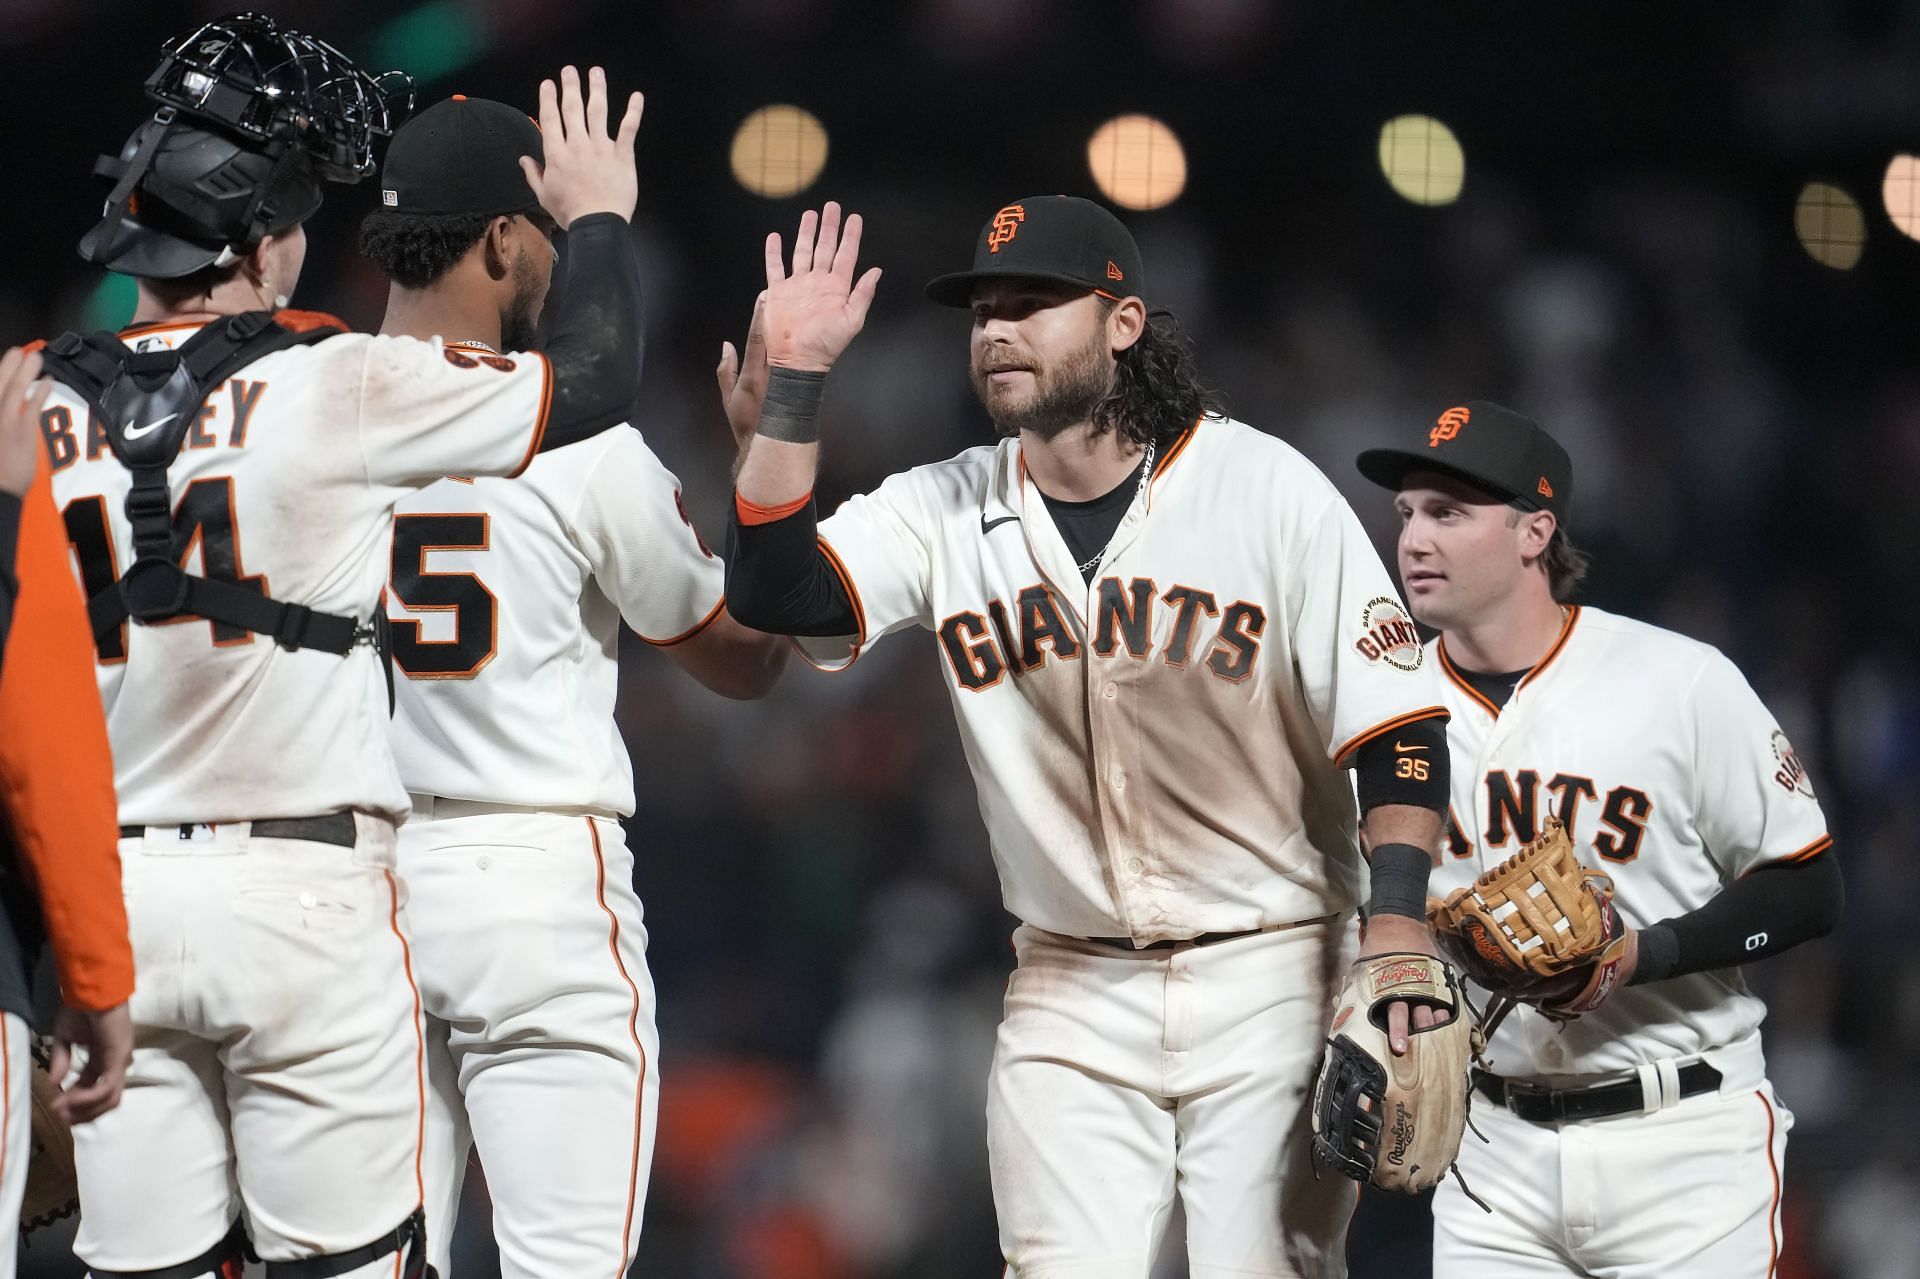 San Francisco Giants Add Cruise Patch to Jersey Sleeve – SportsLogos.Net  News